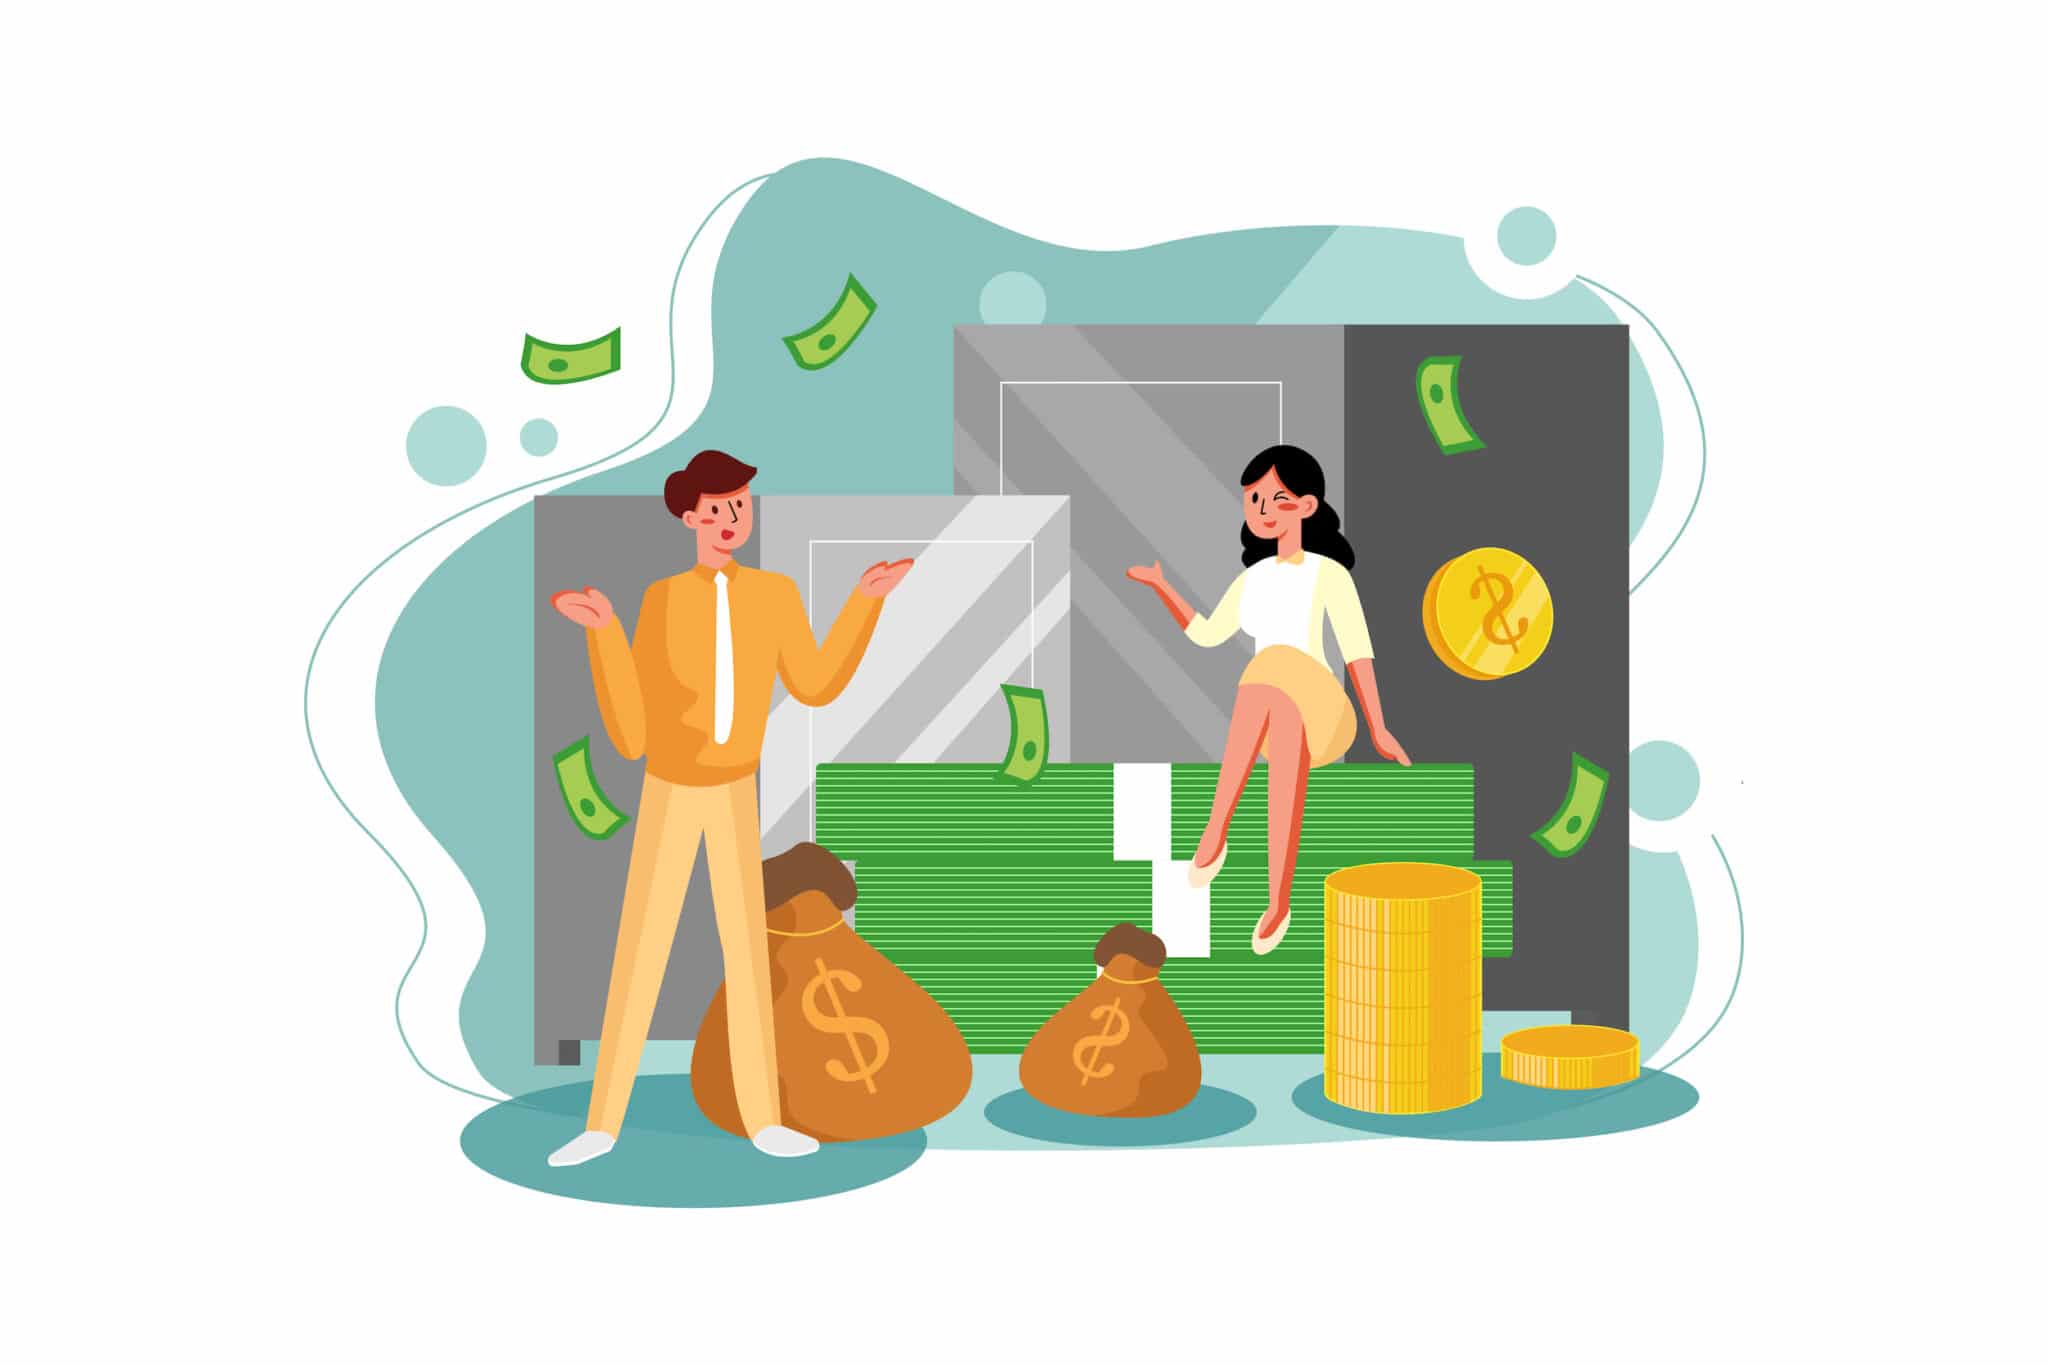 Illustration of two business people at a telecom company surrounded by money